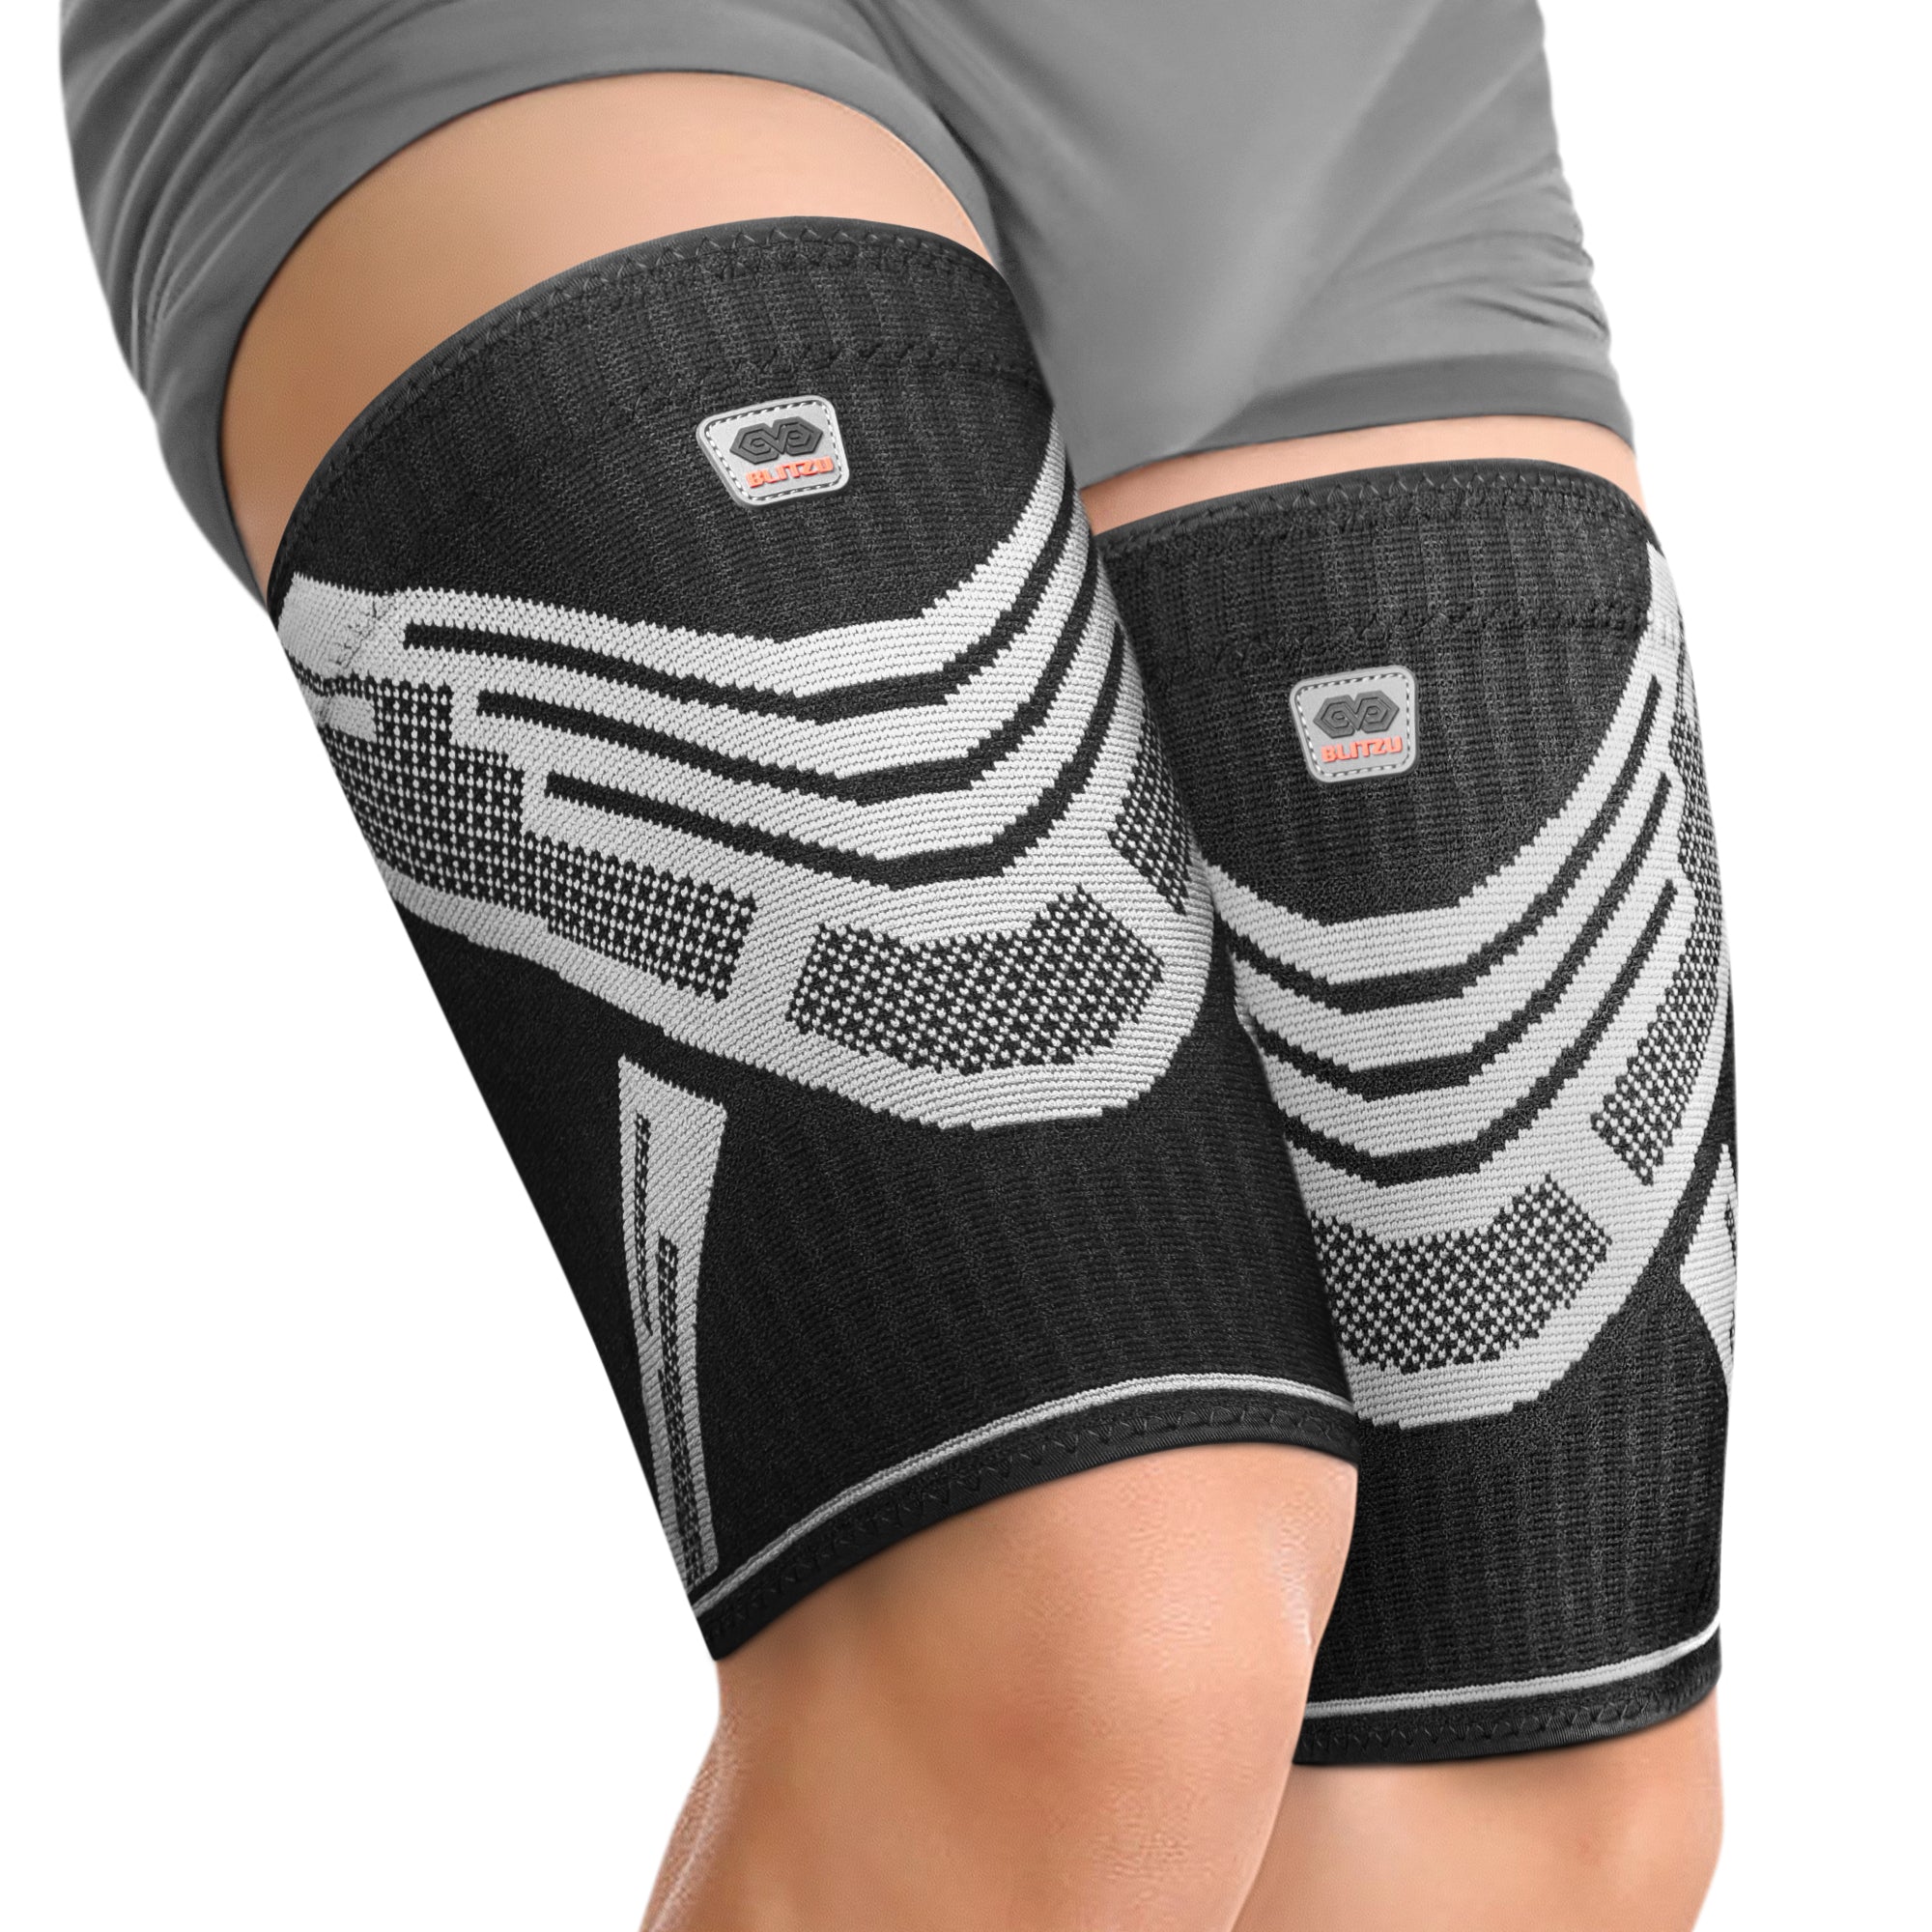 Thigh Compression Sleeve - Hamstring Compression Sleeve (Pair) for Quad &  Groin Pain Relief & Recovery - Thigh Brace & Wrap Great for Running &  Injury